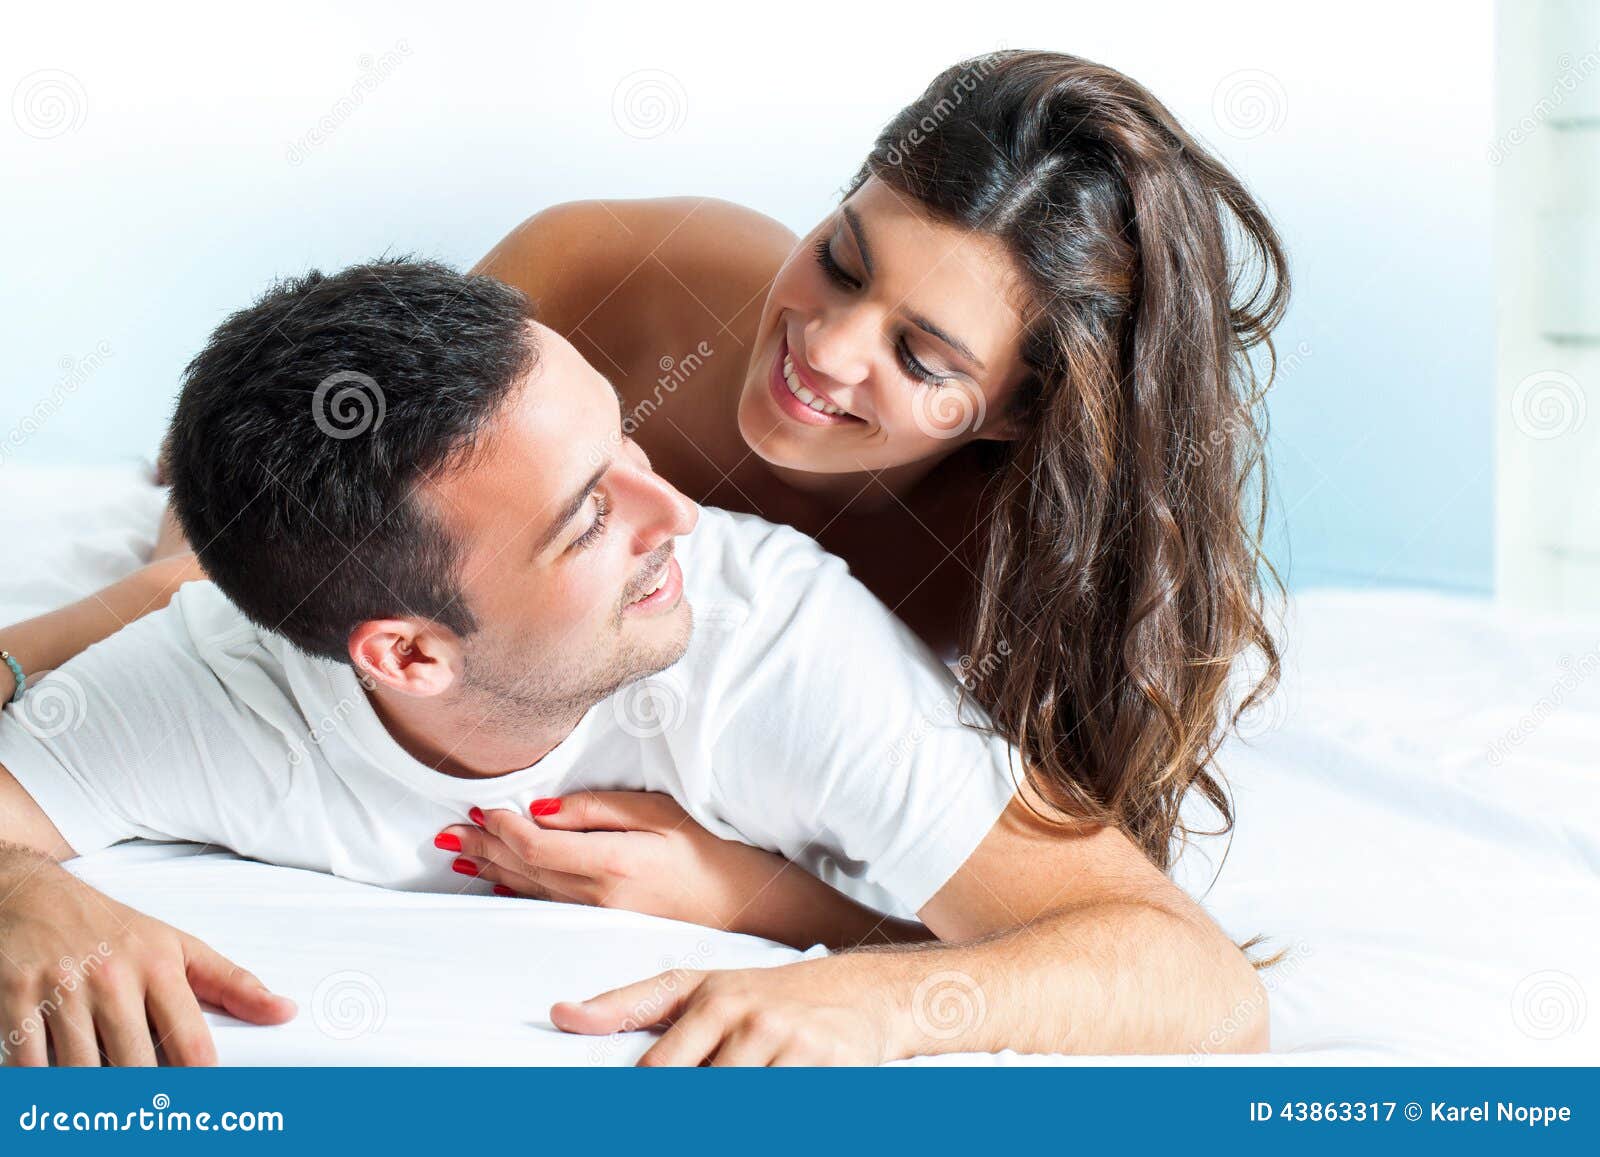 Young Couple In Bedroom Stock Image Image Of Cud